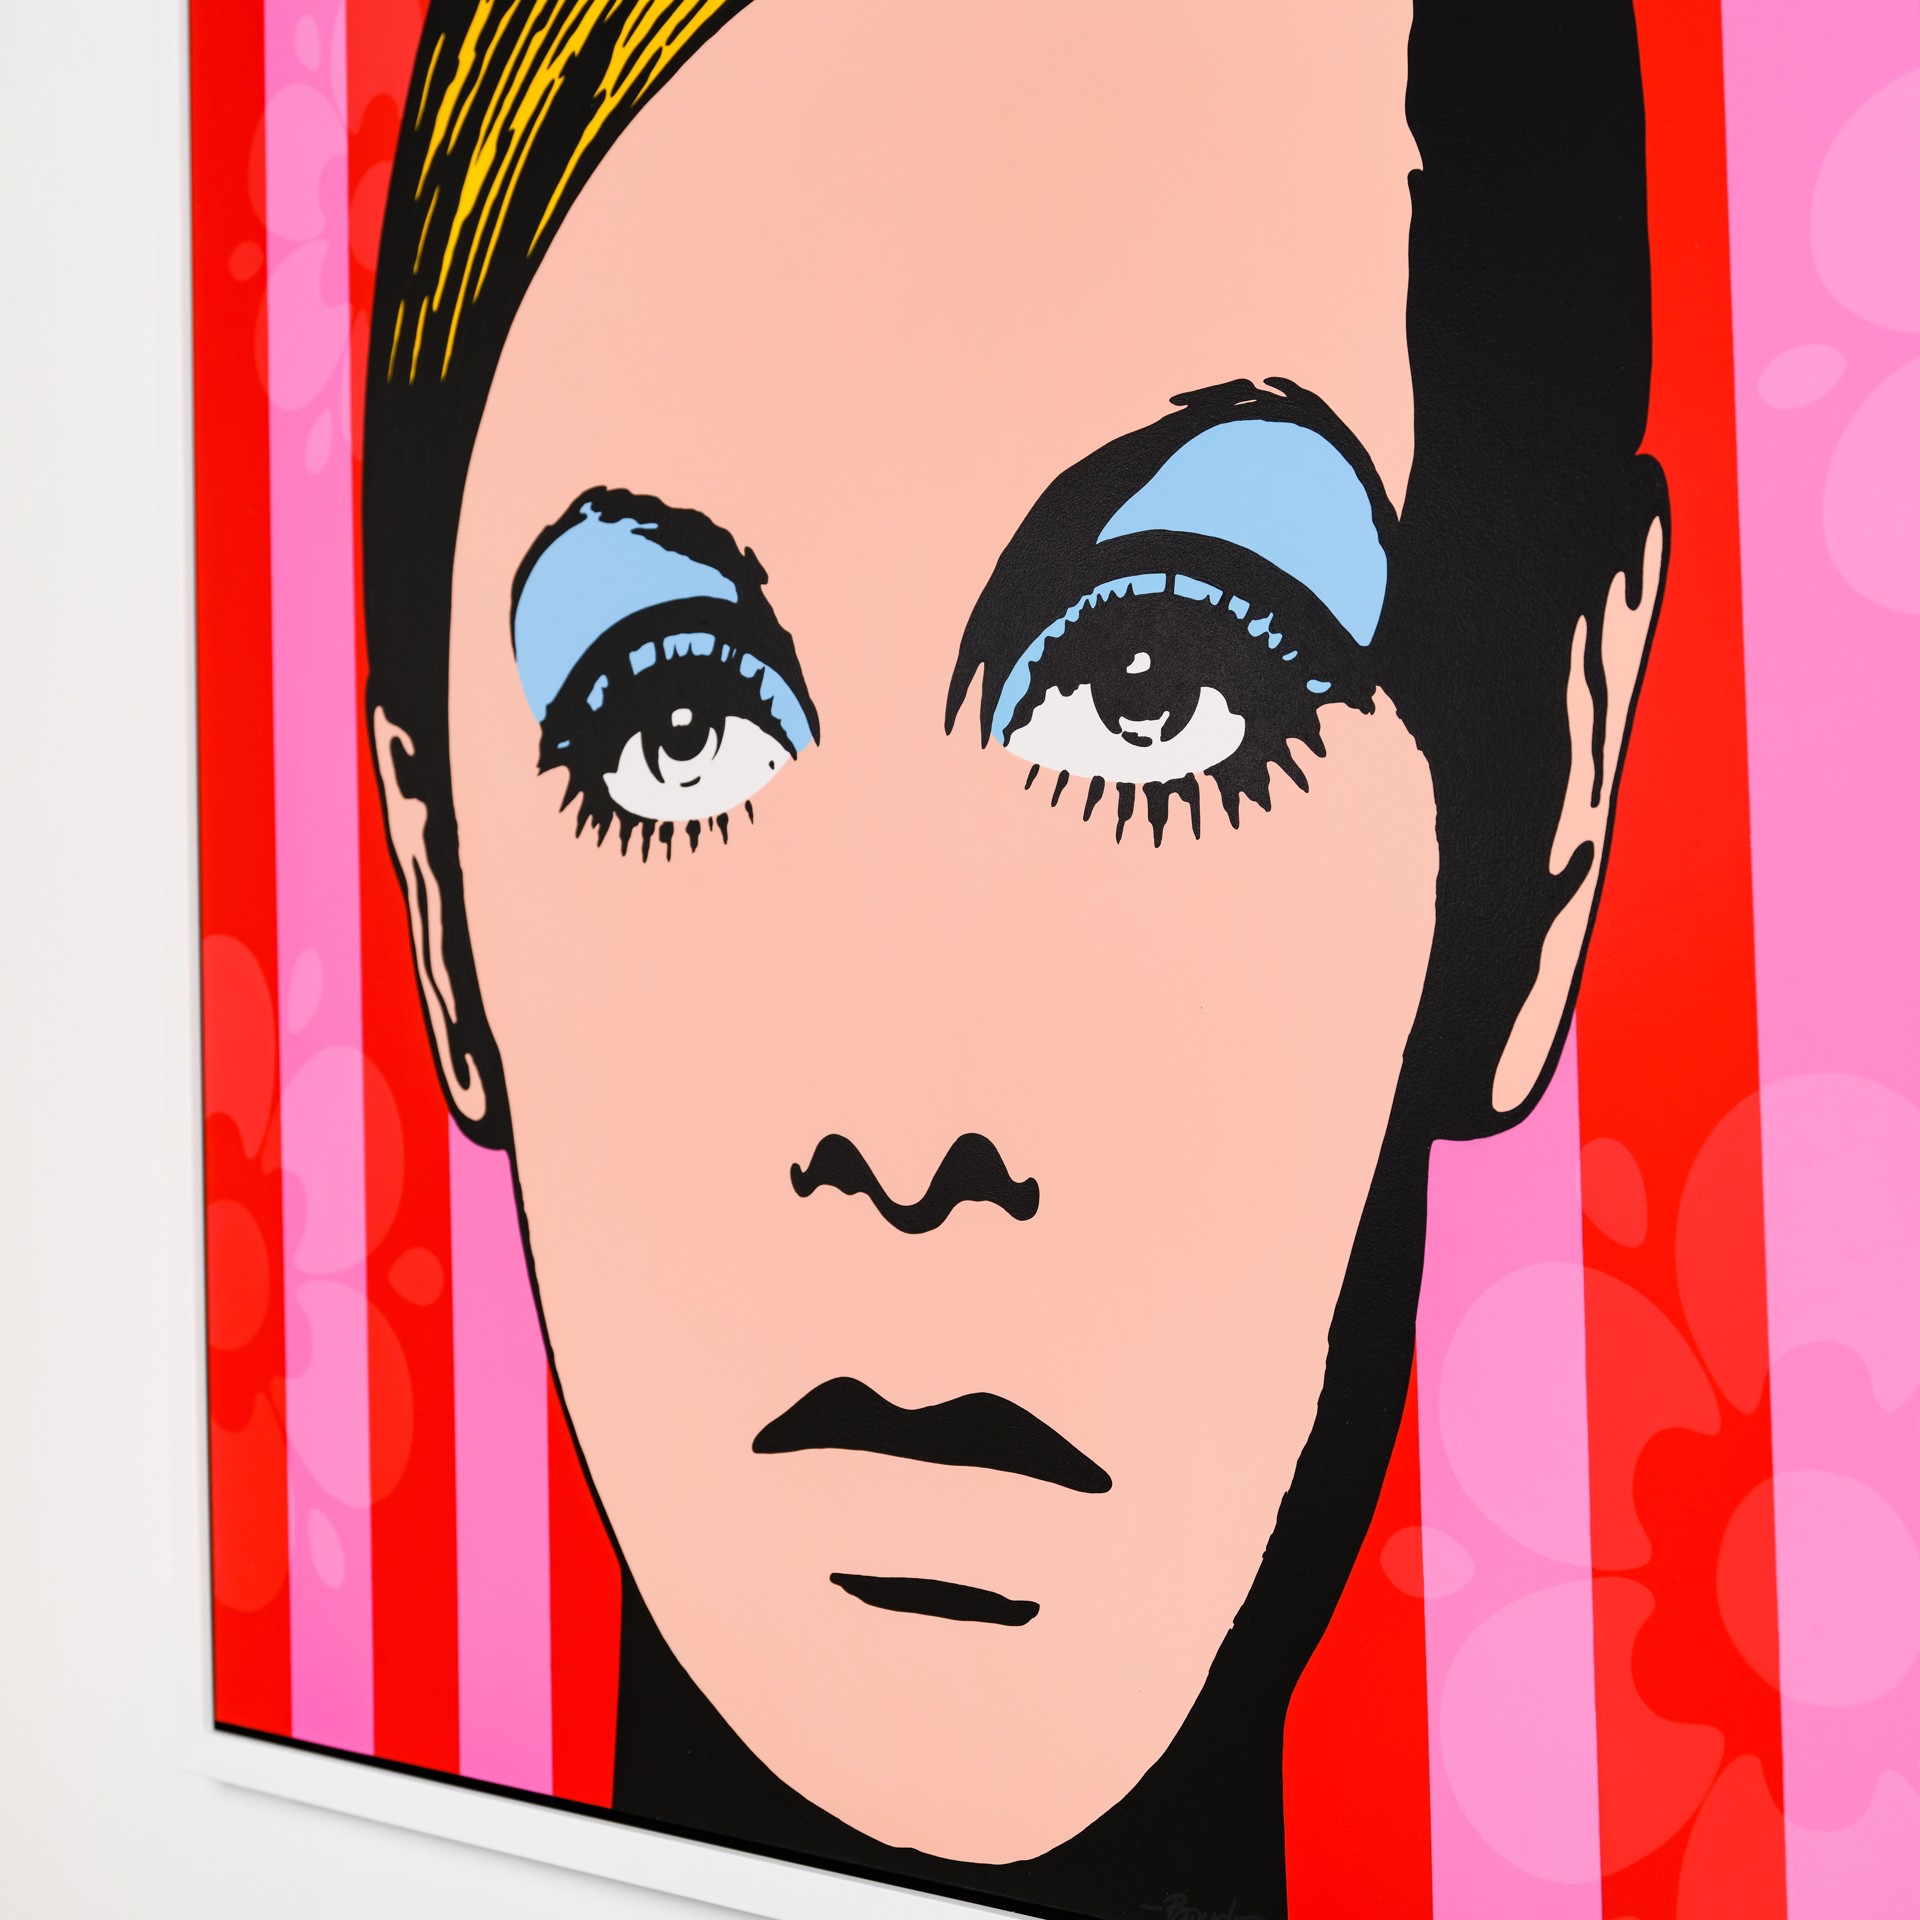 Twiggy by Boudro